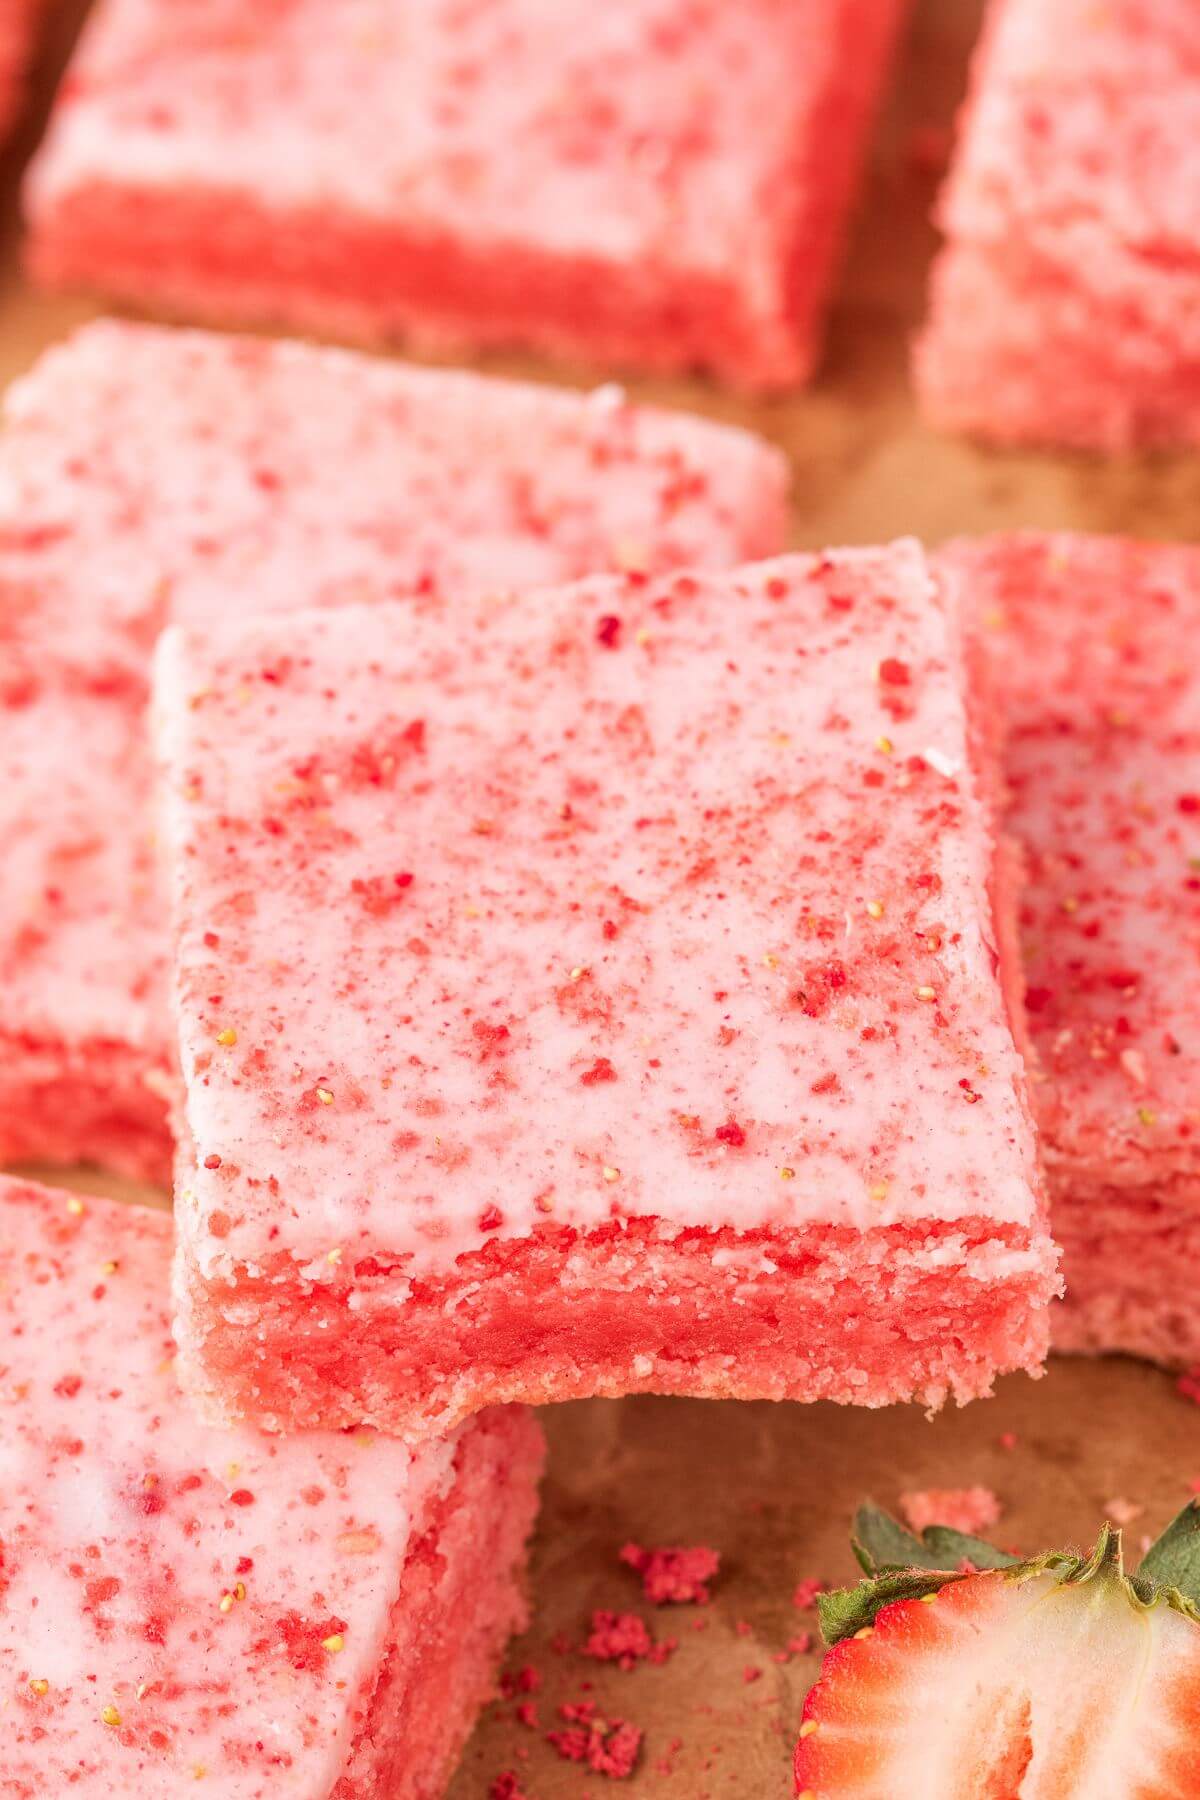 Pink strawberry blondies are in a row on a paper surface.